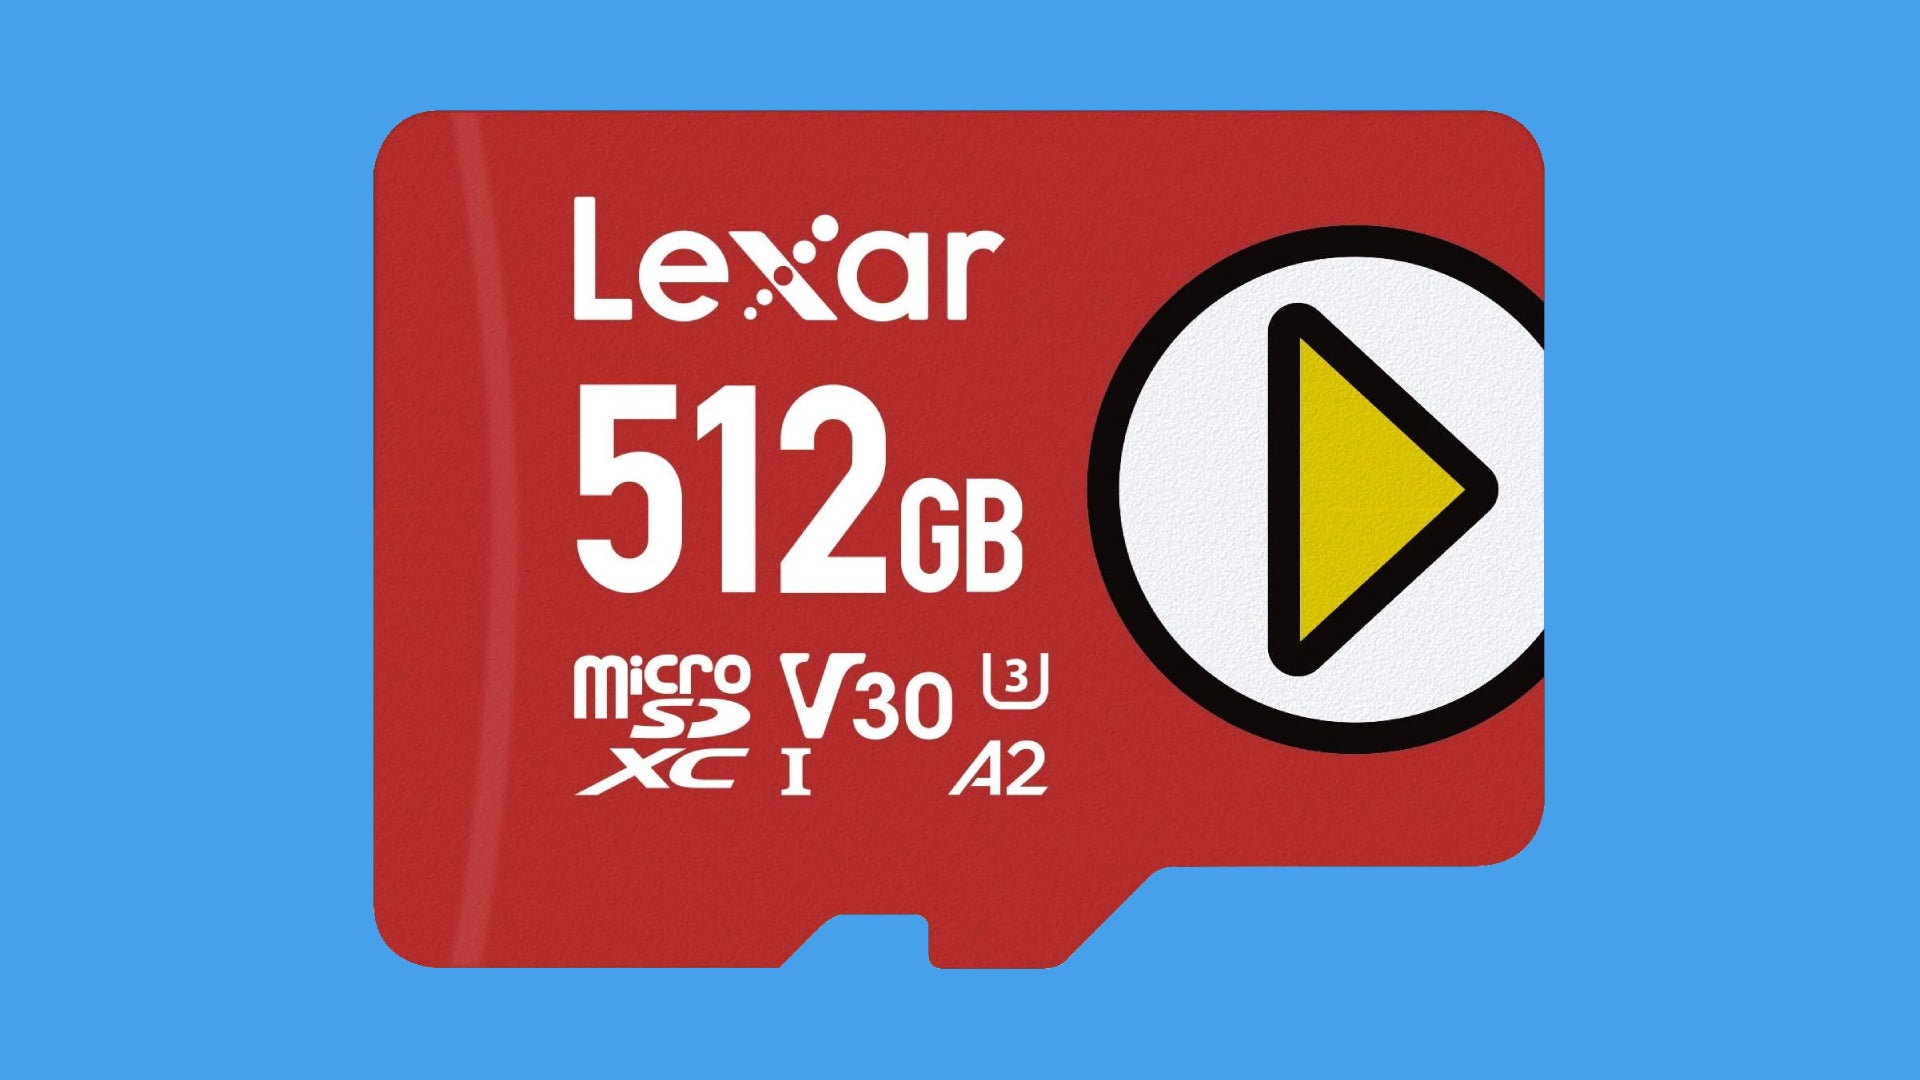 Grab this fast 512GB A2-rated micro SD card for its lowest